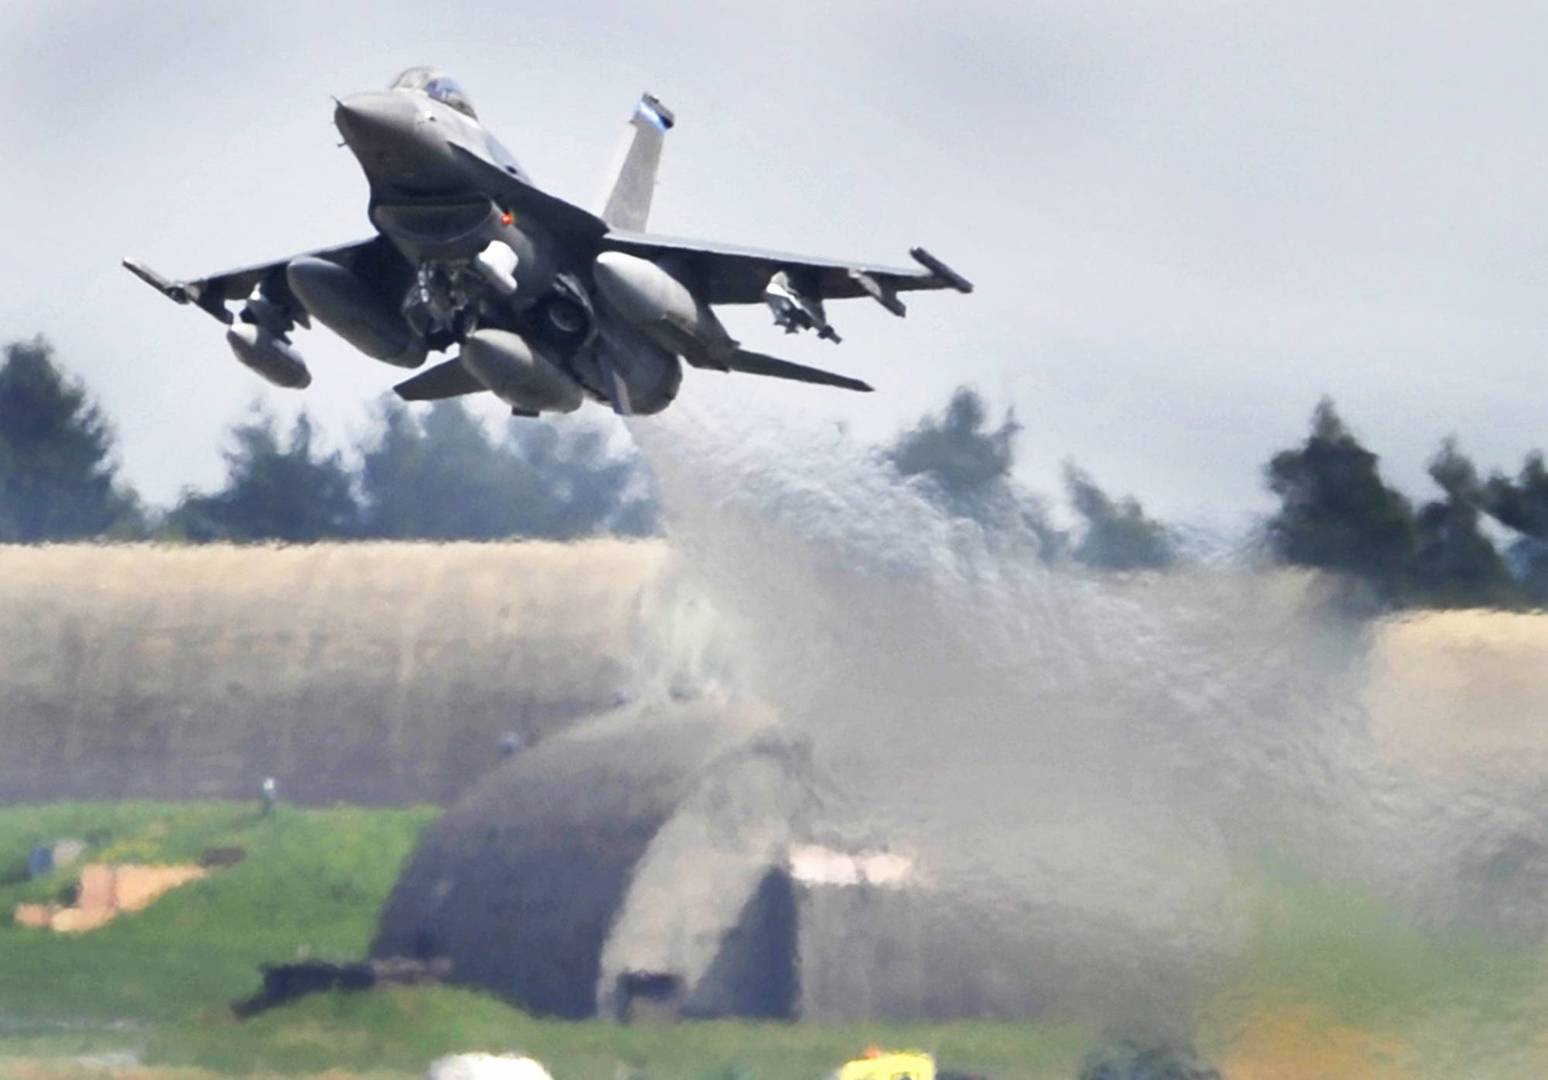 FILE - In this April 27, 2010 file photo an F-16 airplane lifts off at the US military Airport in Spangdahlem, Germany. The U.S. military says an F-16 fighter jet has crashed in western Germany but the pilot ejected to safety. Police said the plane came down in the Zemmer area, between the city of Trier and the U.S. Air Force's Spangdahlem Air Base. (Boris Roessler/dpa via AP, file)